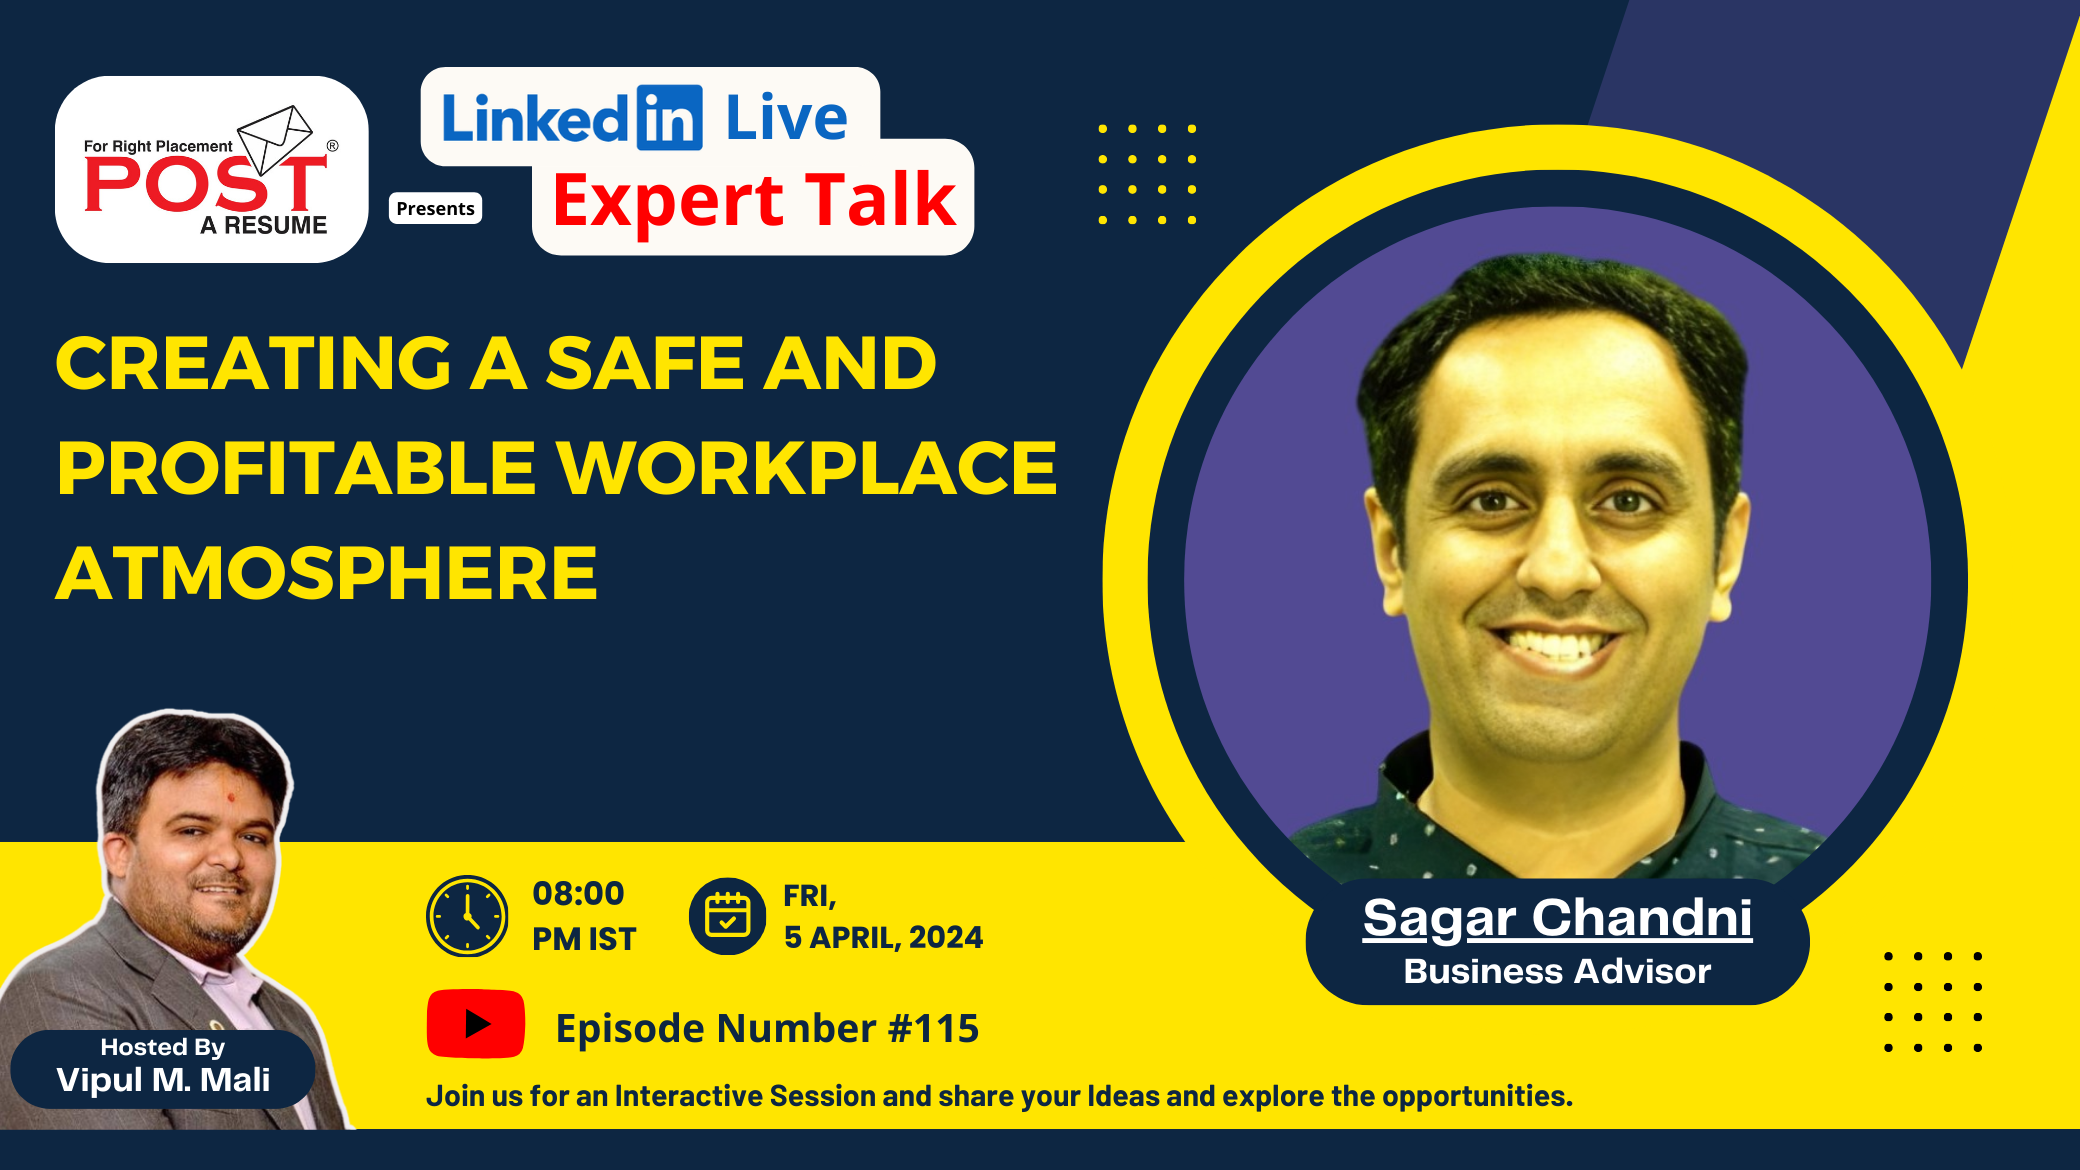 Expert Talk Ep. 115 with Sagar Chandni on Creating a Safe and Profitable Workplace Atmosphere